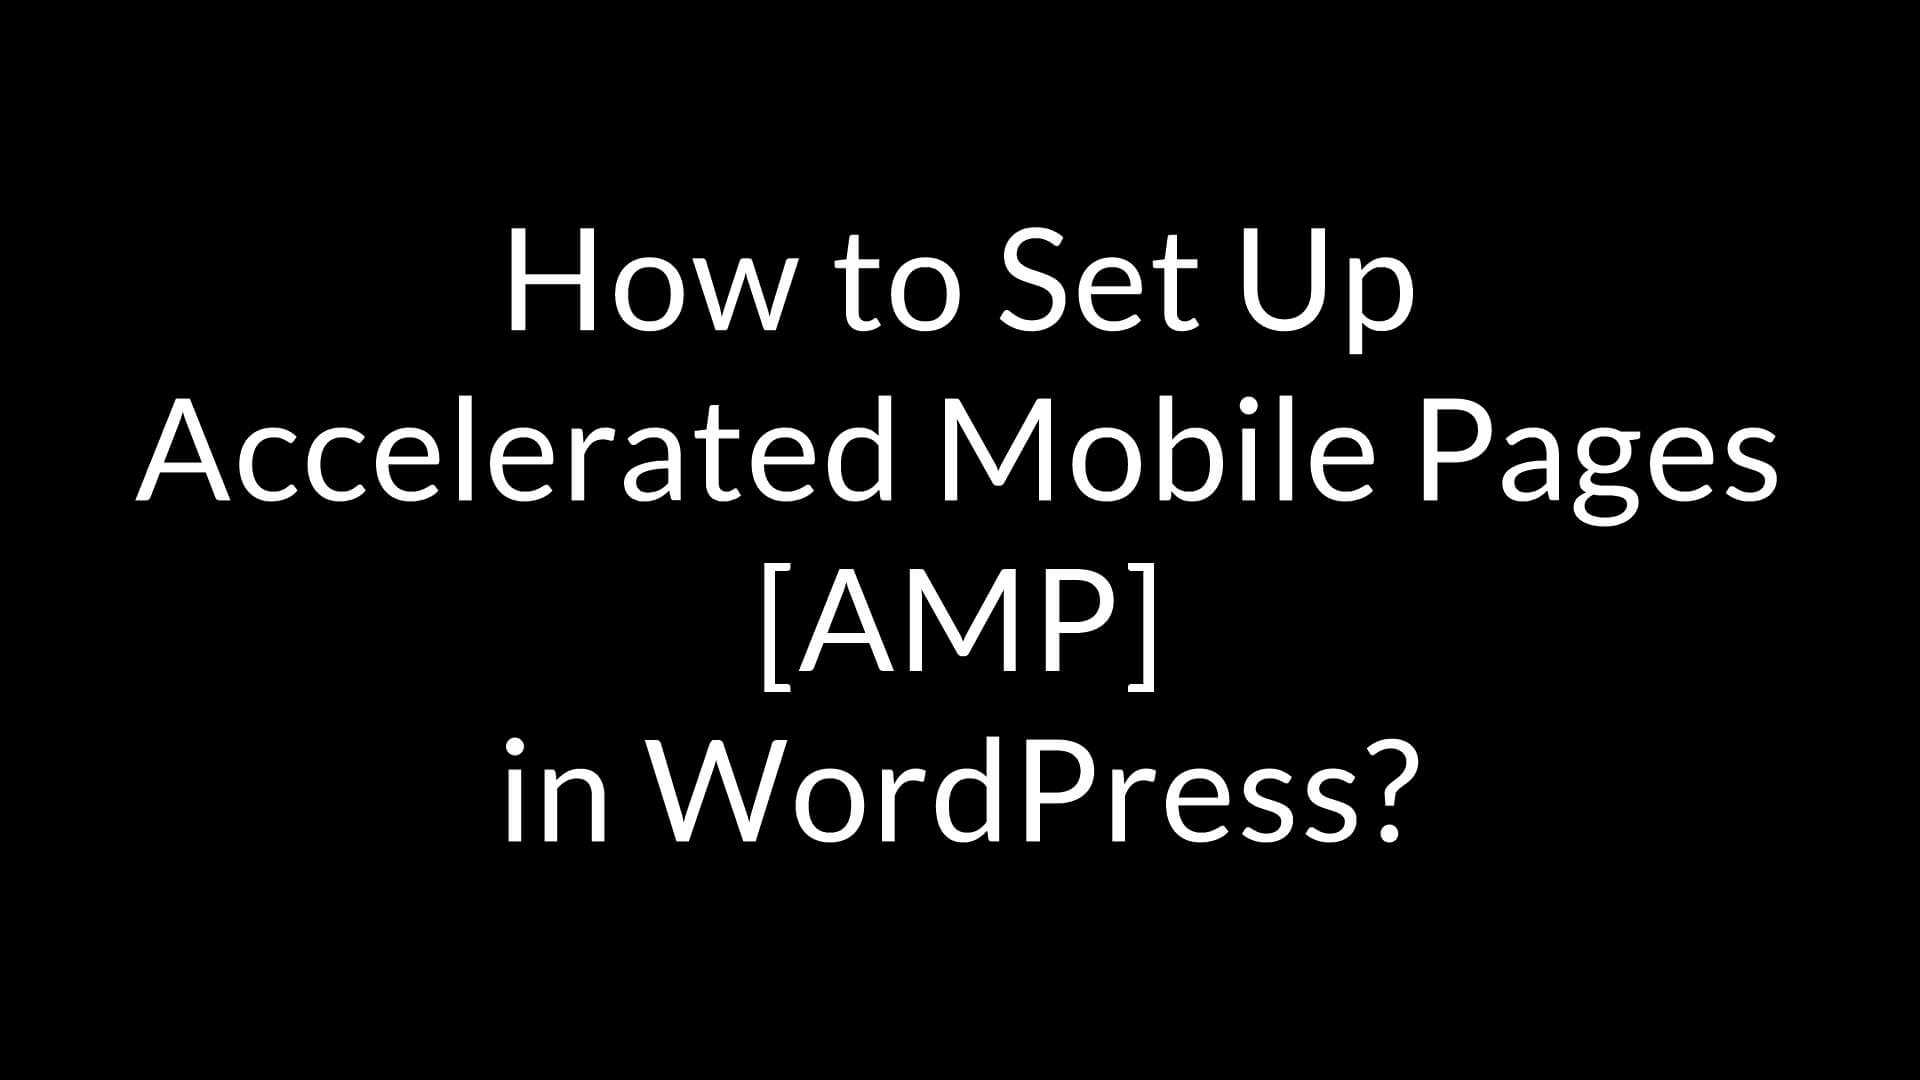 How to set up Accelerated Mobile Pages [AMP] in WordPress